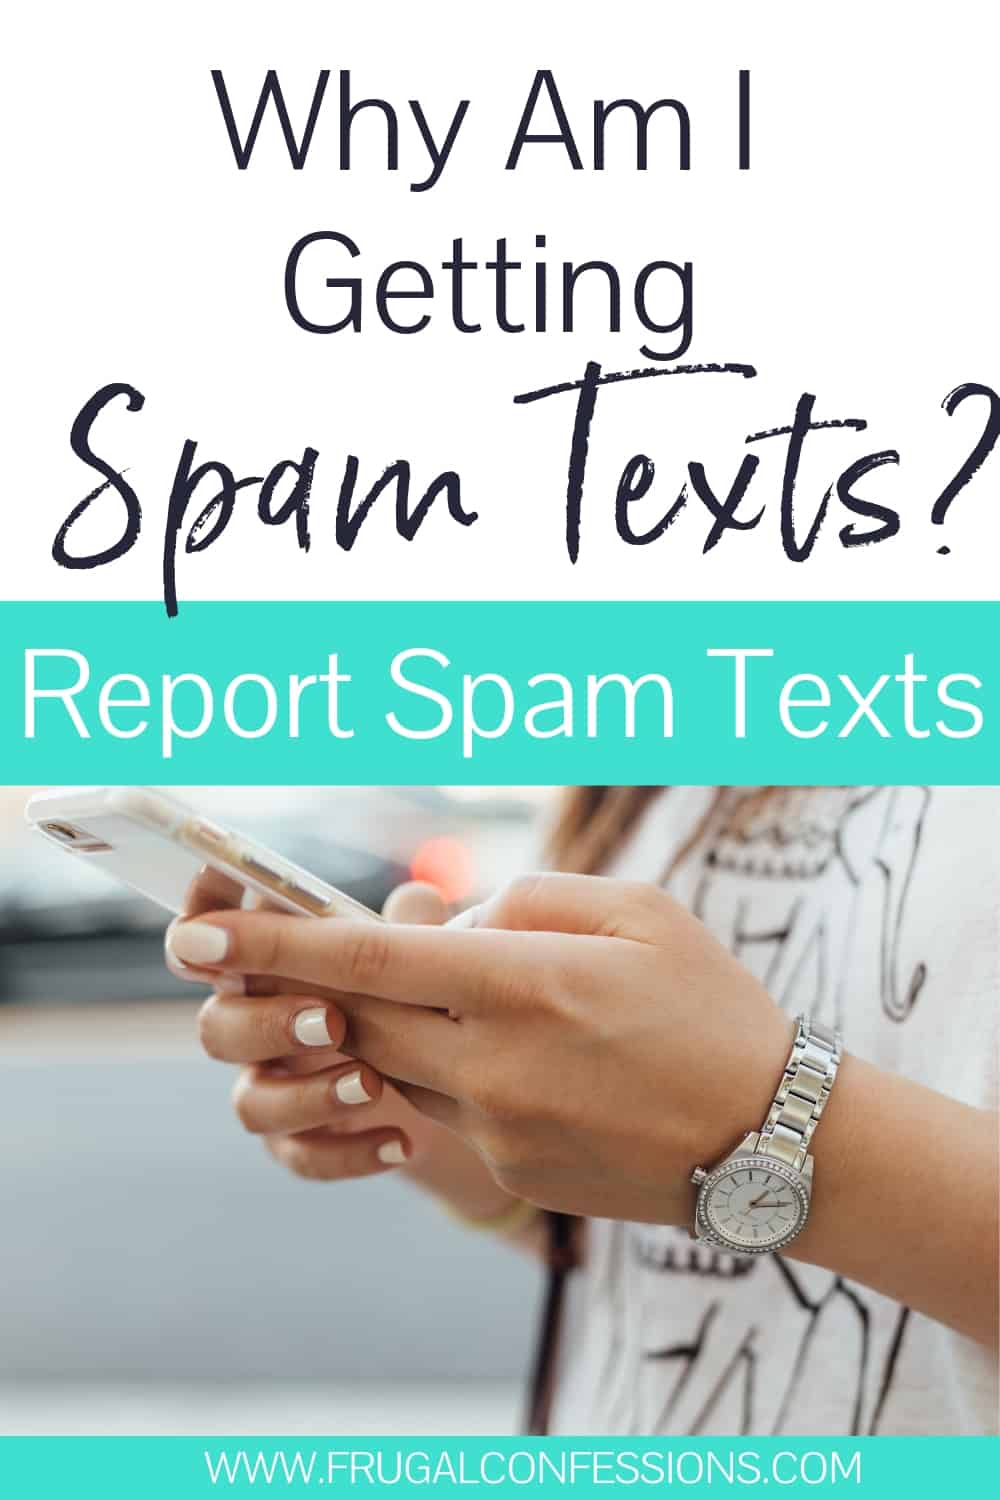 young girl manicured hands holding an iphone, texting with text overlay "why am I getting spam texts? report spam texts"